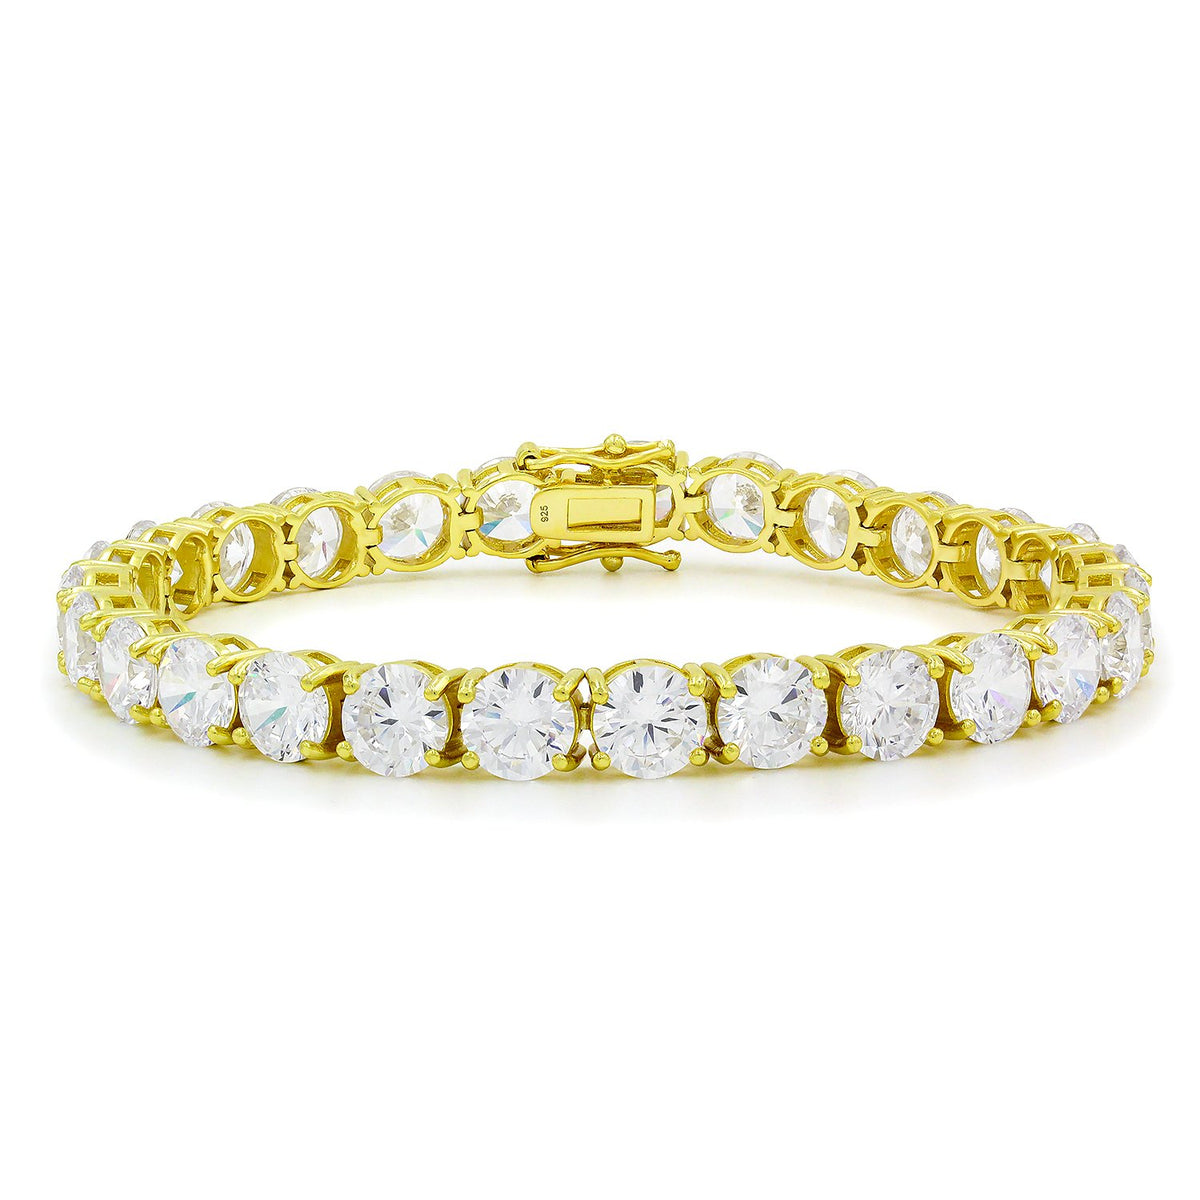 925 Sterling Silver 7mm Round Cut Tennis Bracelet, Yellow Gold Plated